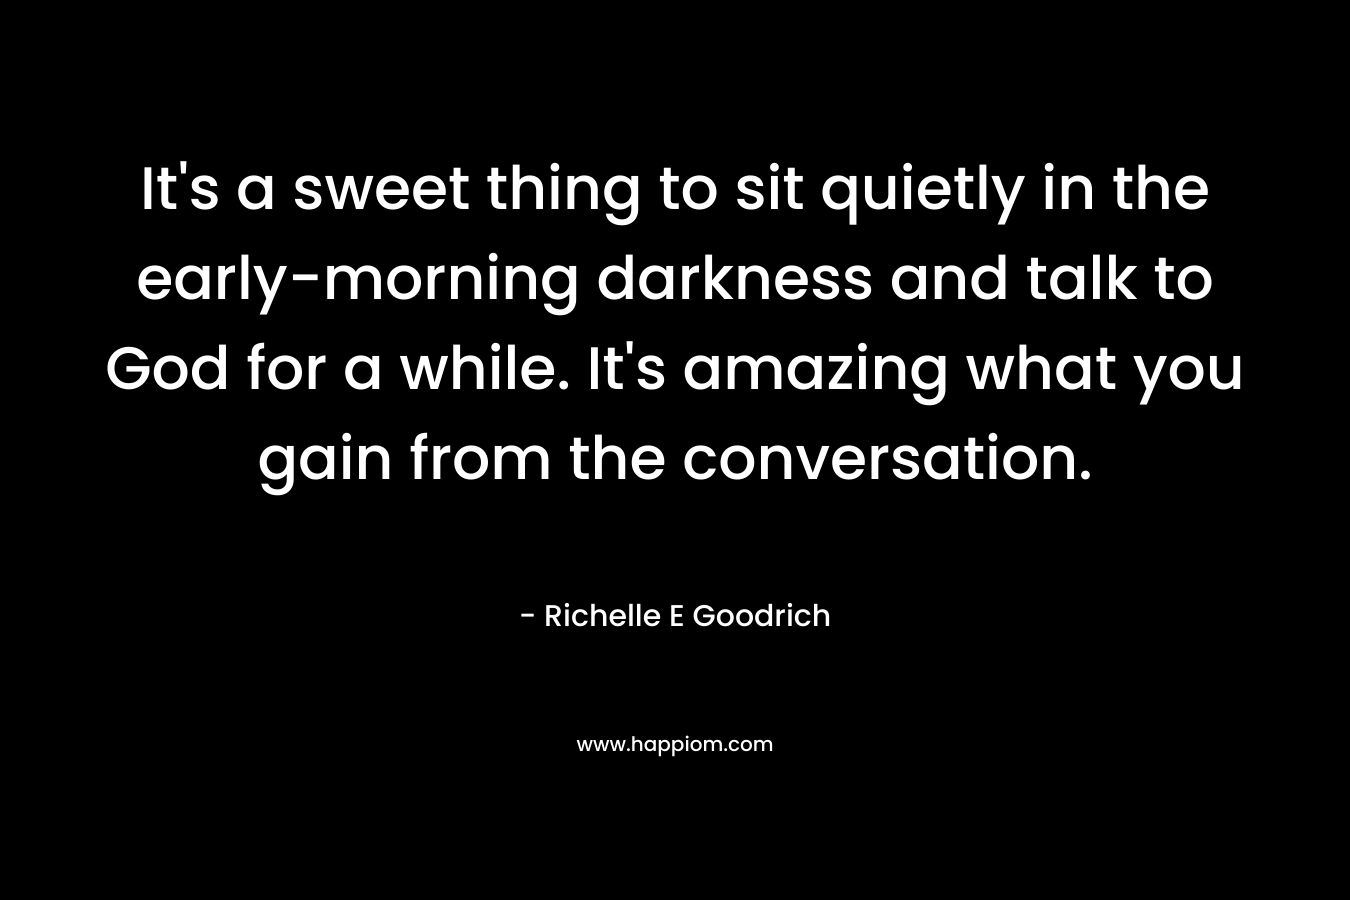 It's a sweet thing to sit quietly in the early-morning darkness and talk to God for a while. It's amazing what you gain from the conversation.